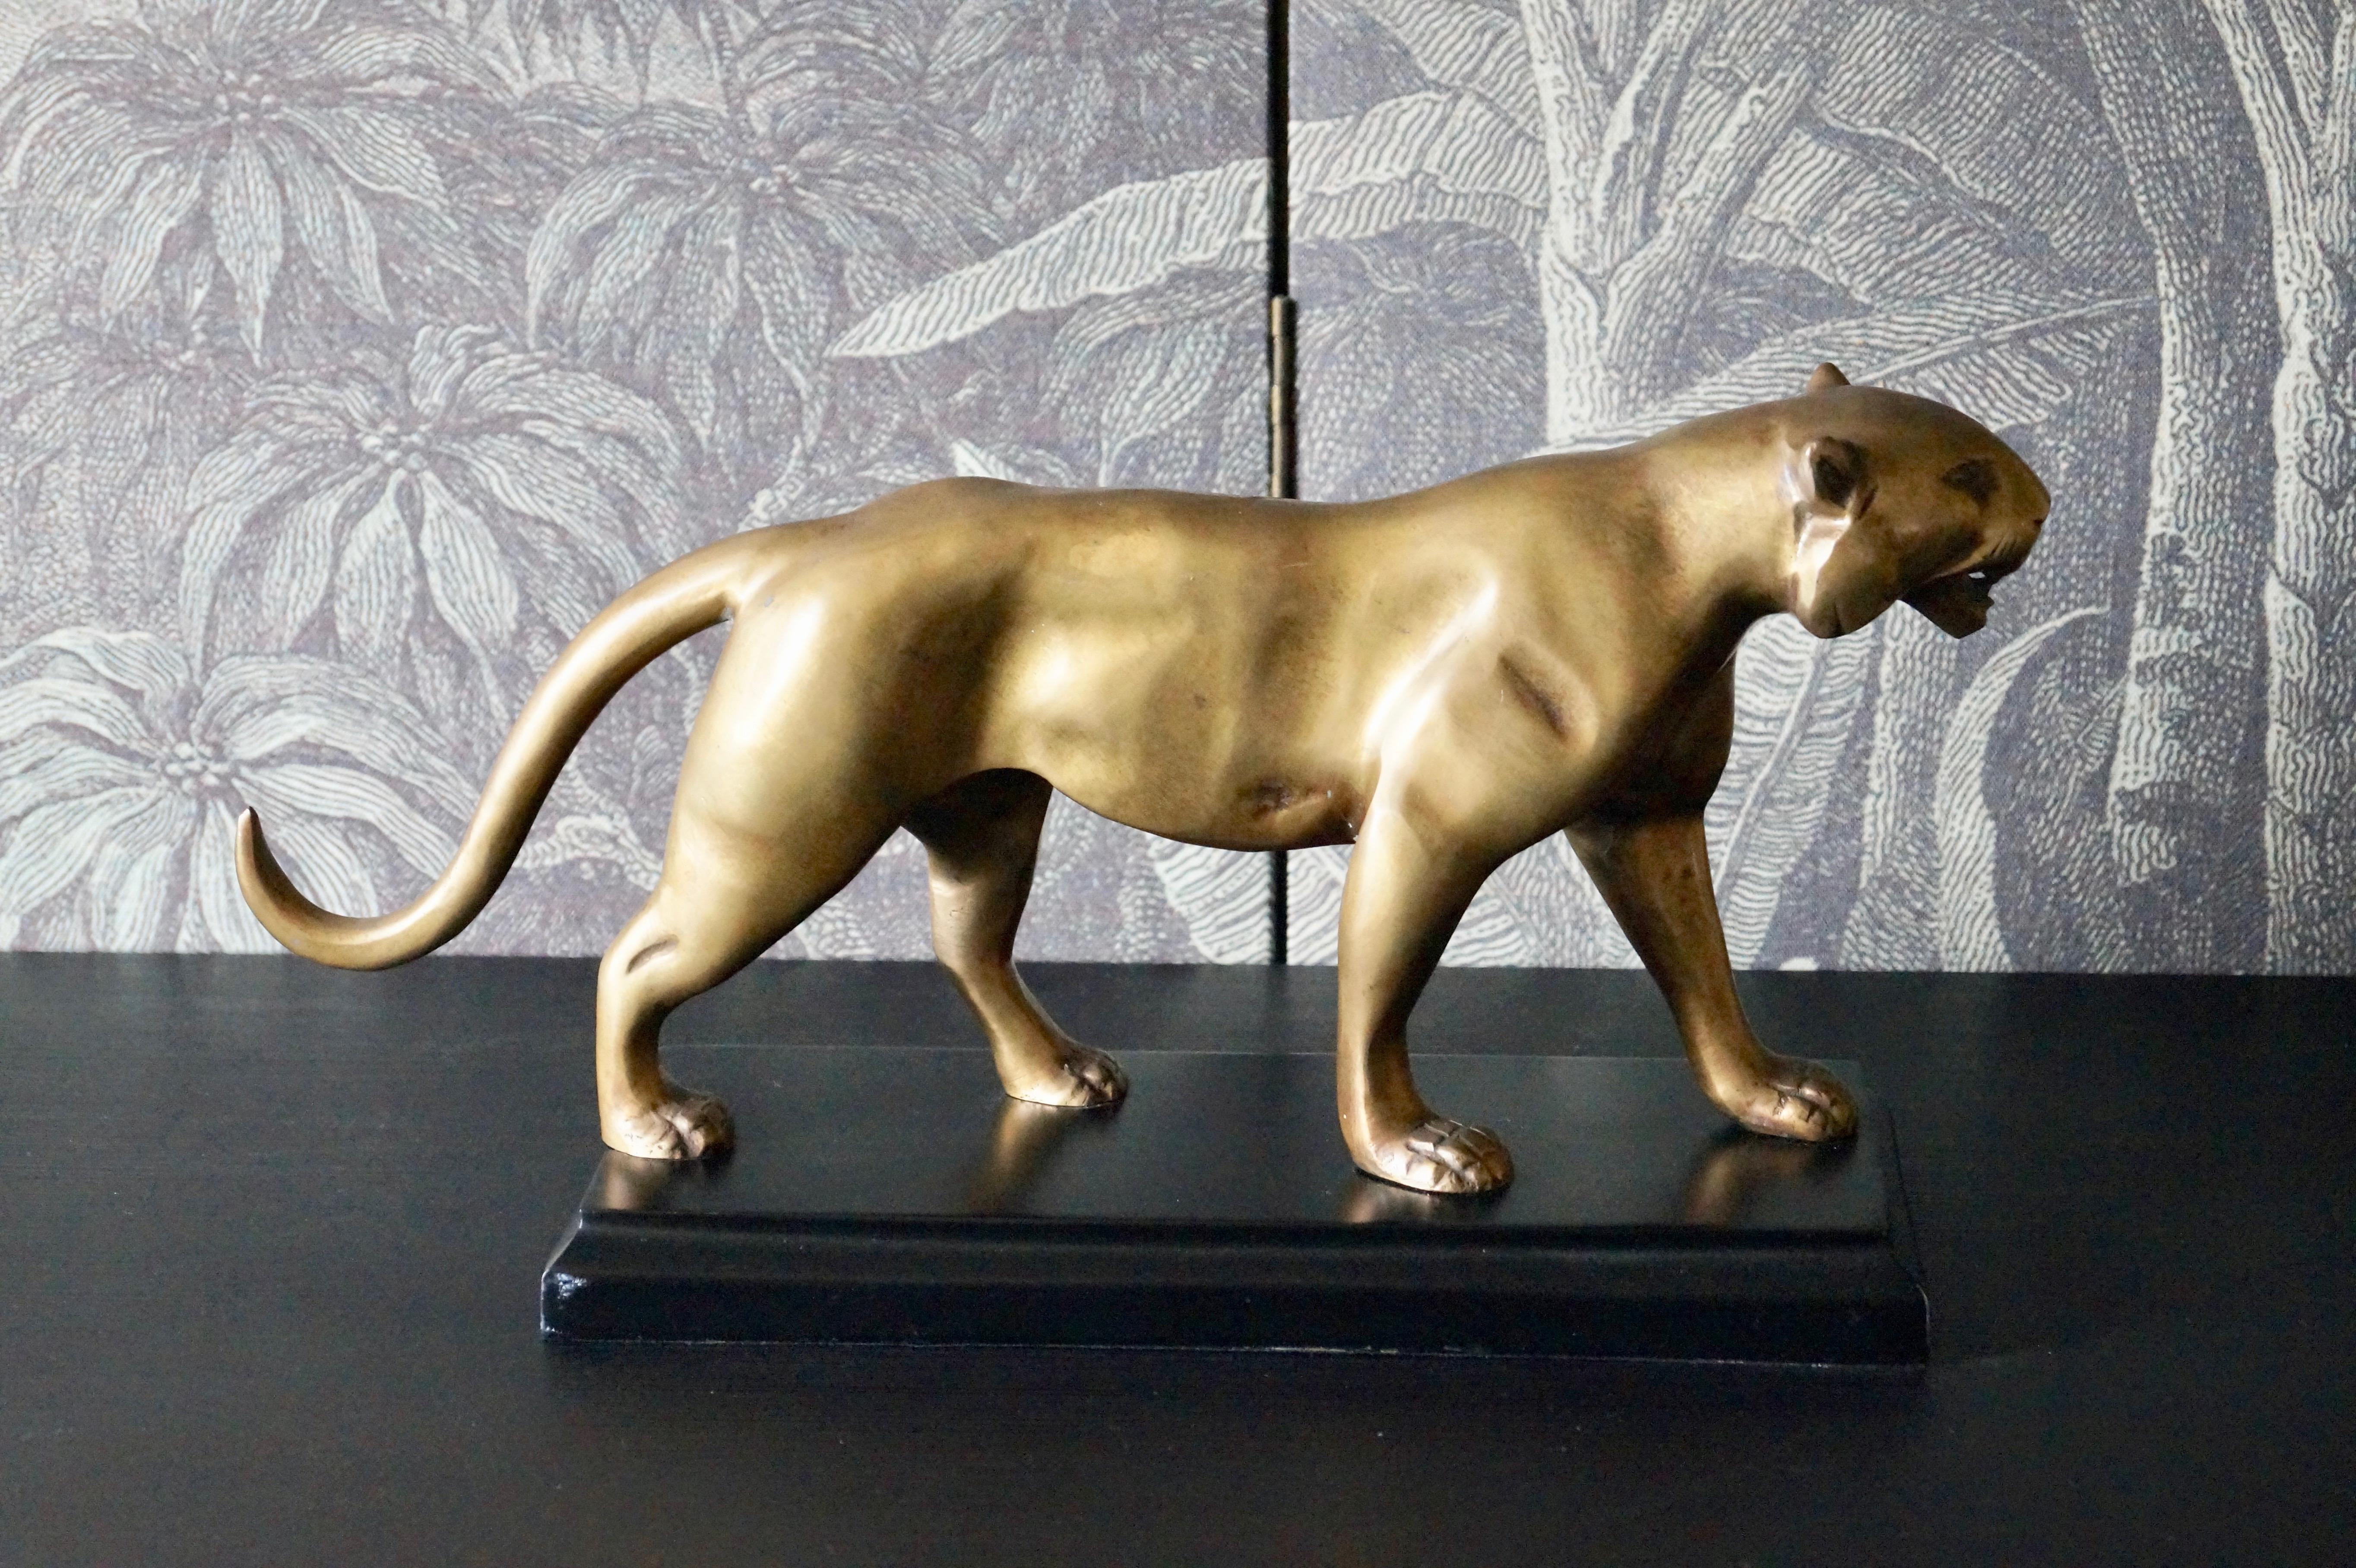 Wonderful brass sculpture of a lion. Abstracted with beautiful impression of the strong lion body.

France 1970s.